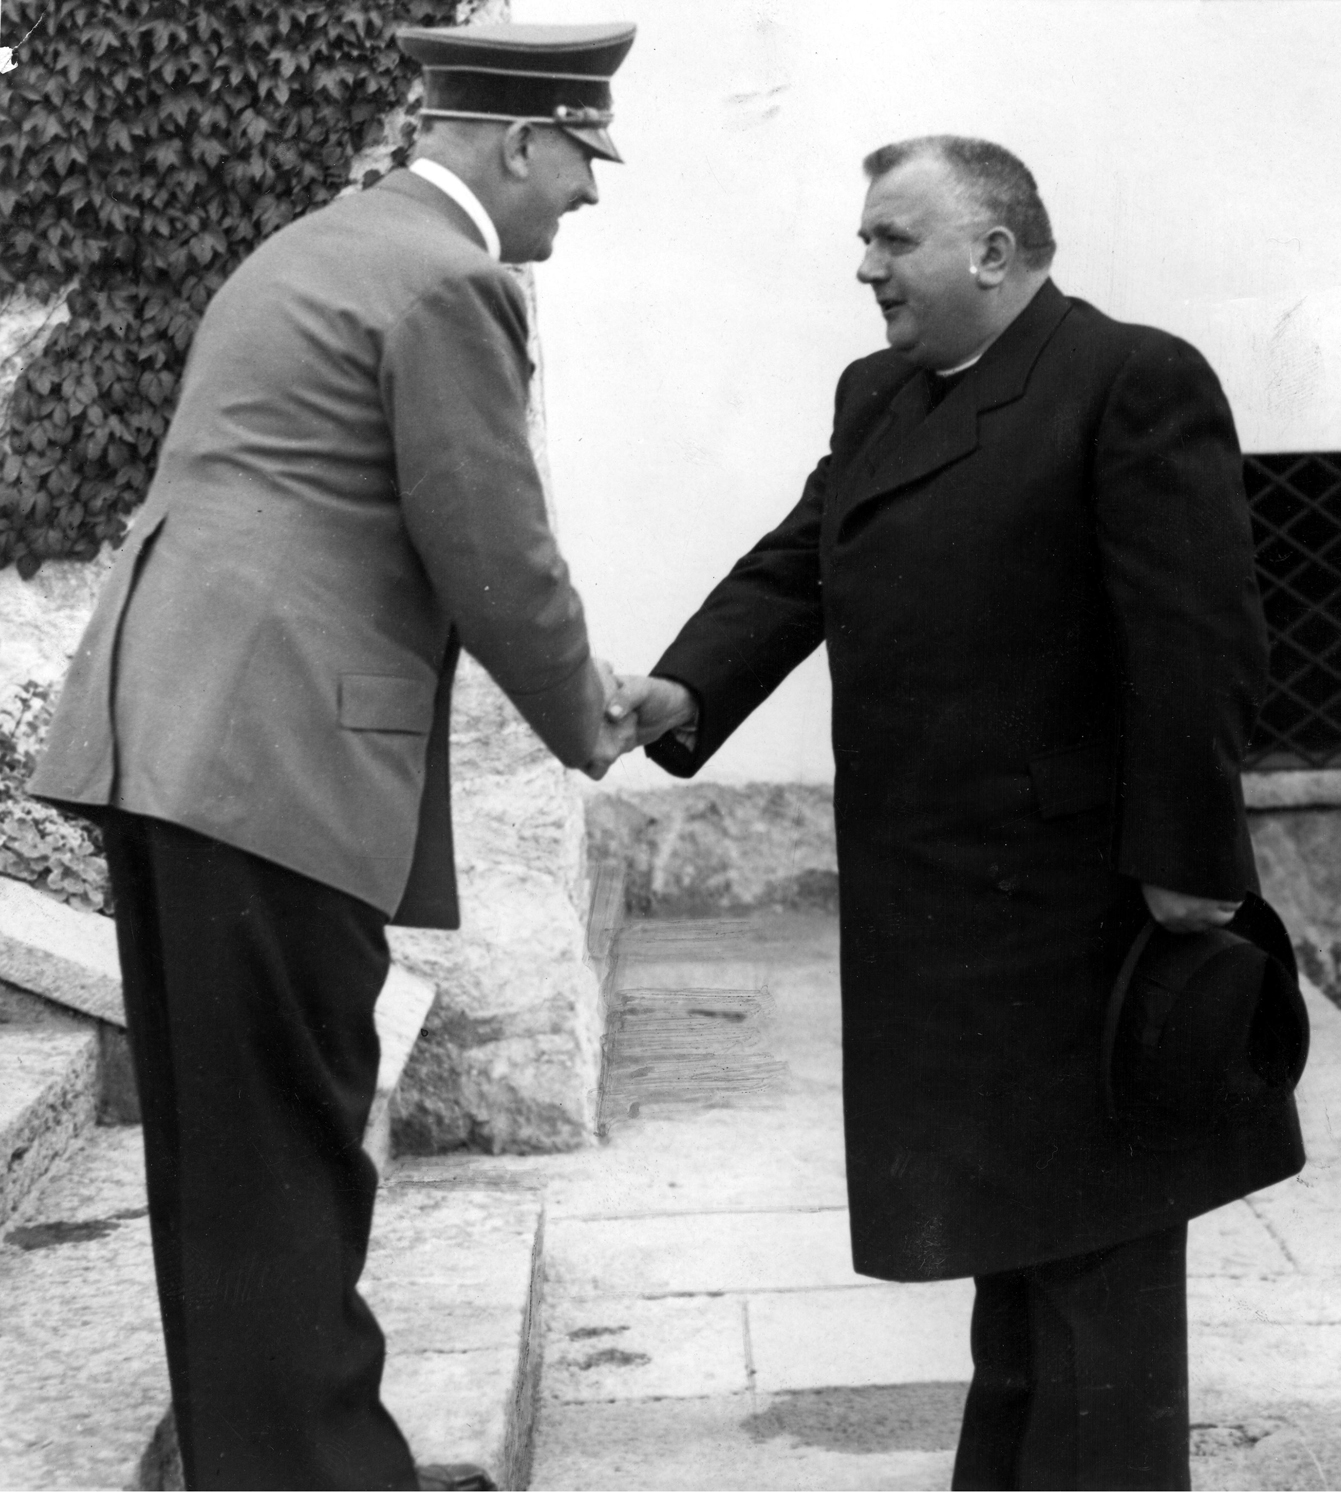 Adolf Hitler welcoming the Slovak President Dr. Jozef Tiso in front of the Berghof